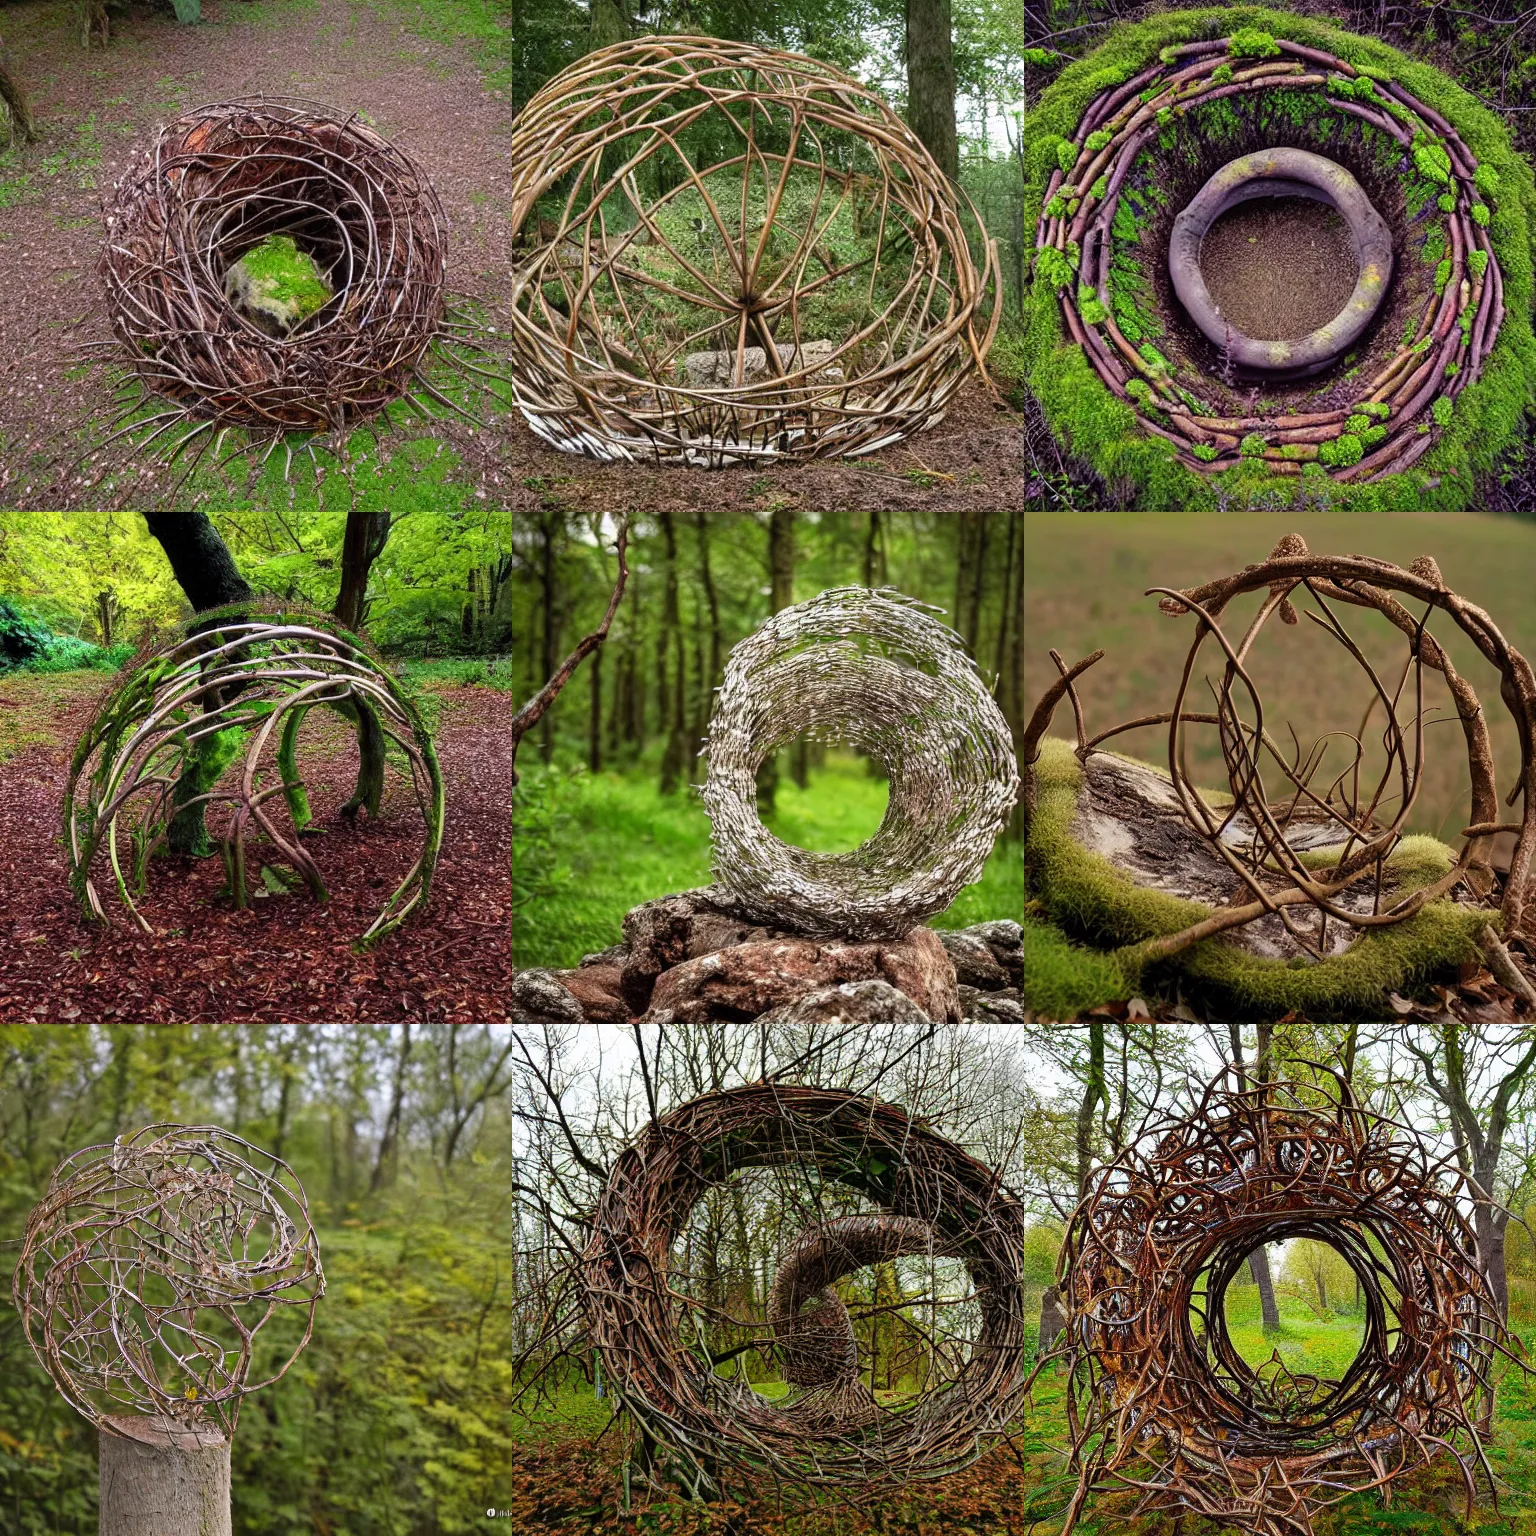 Prompt: an environment art sculpture by Nils-Udo, leaves twigs wood, nature, natural, round form, berries inside structure, leaf spiral pattern around outside